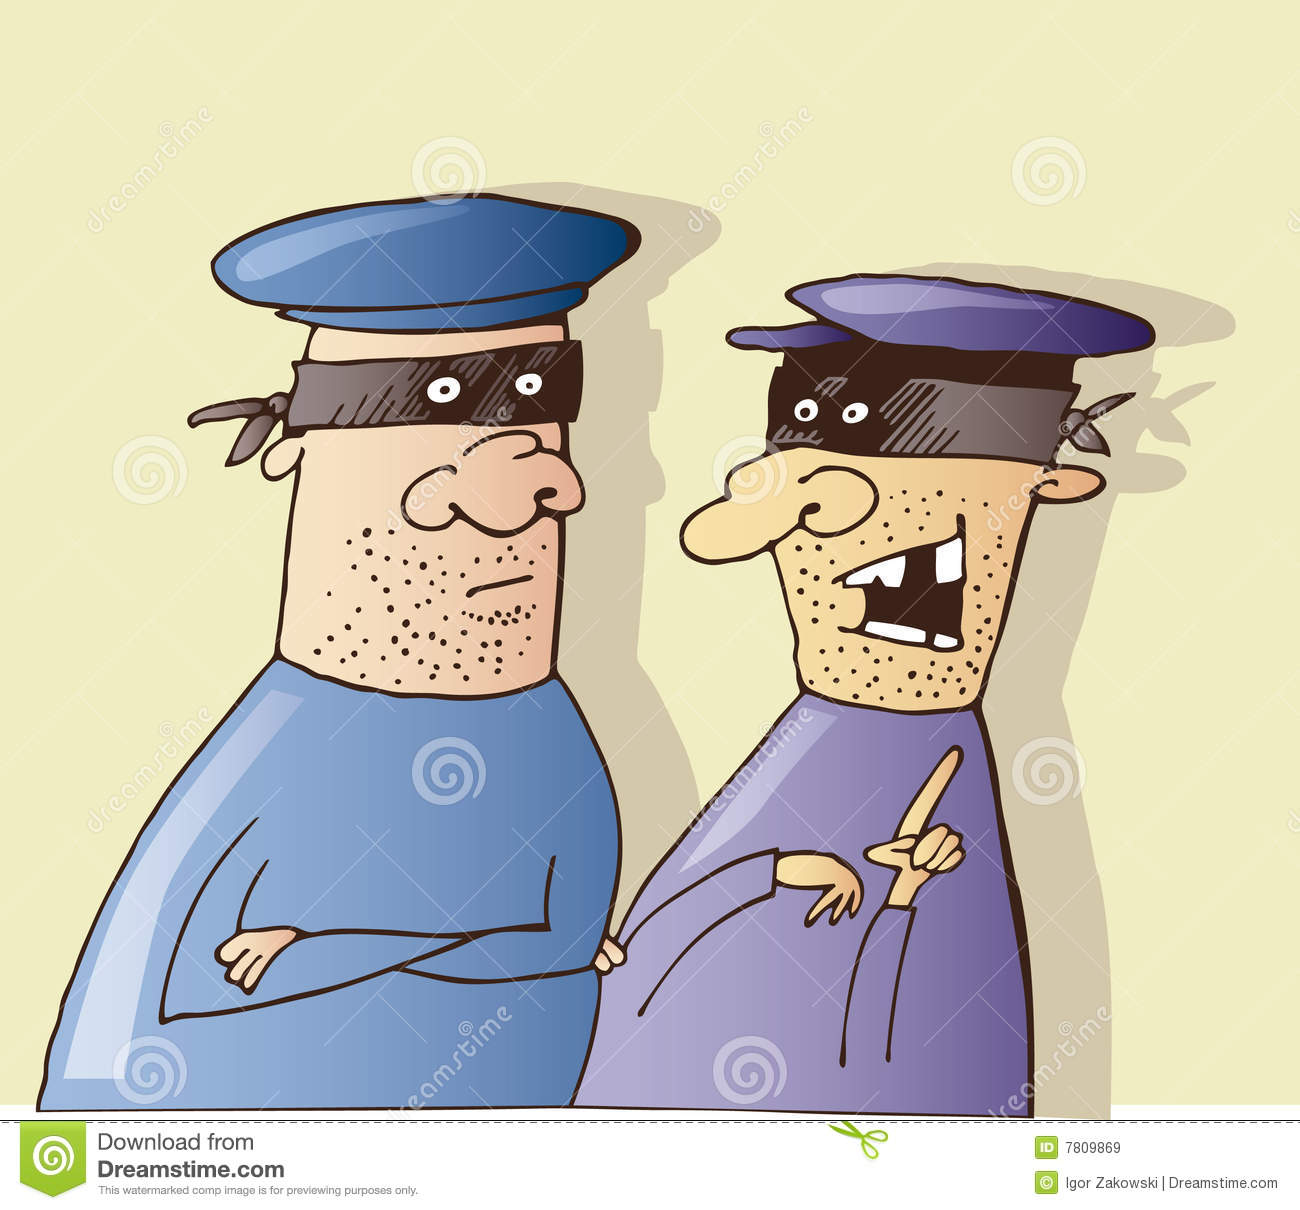 Two Thieves Talking Royalty Free Stock Images   Image  7809869